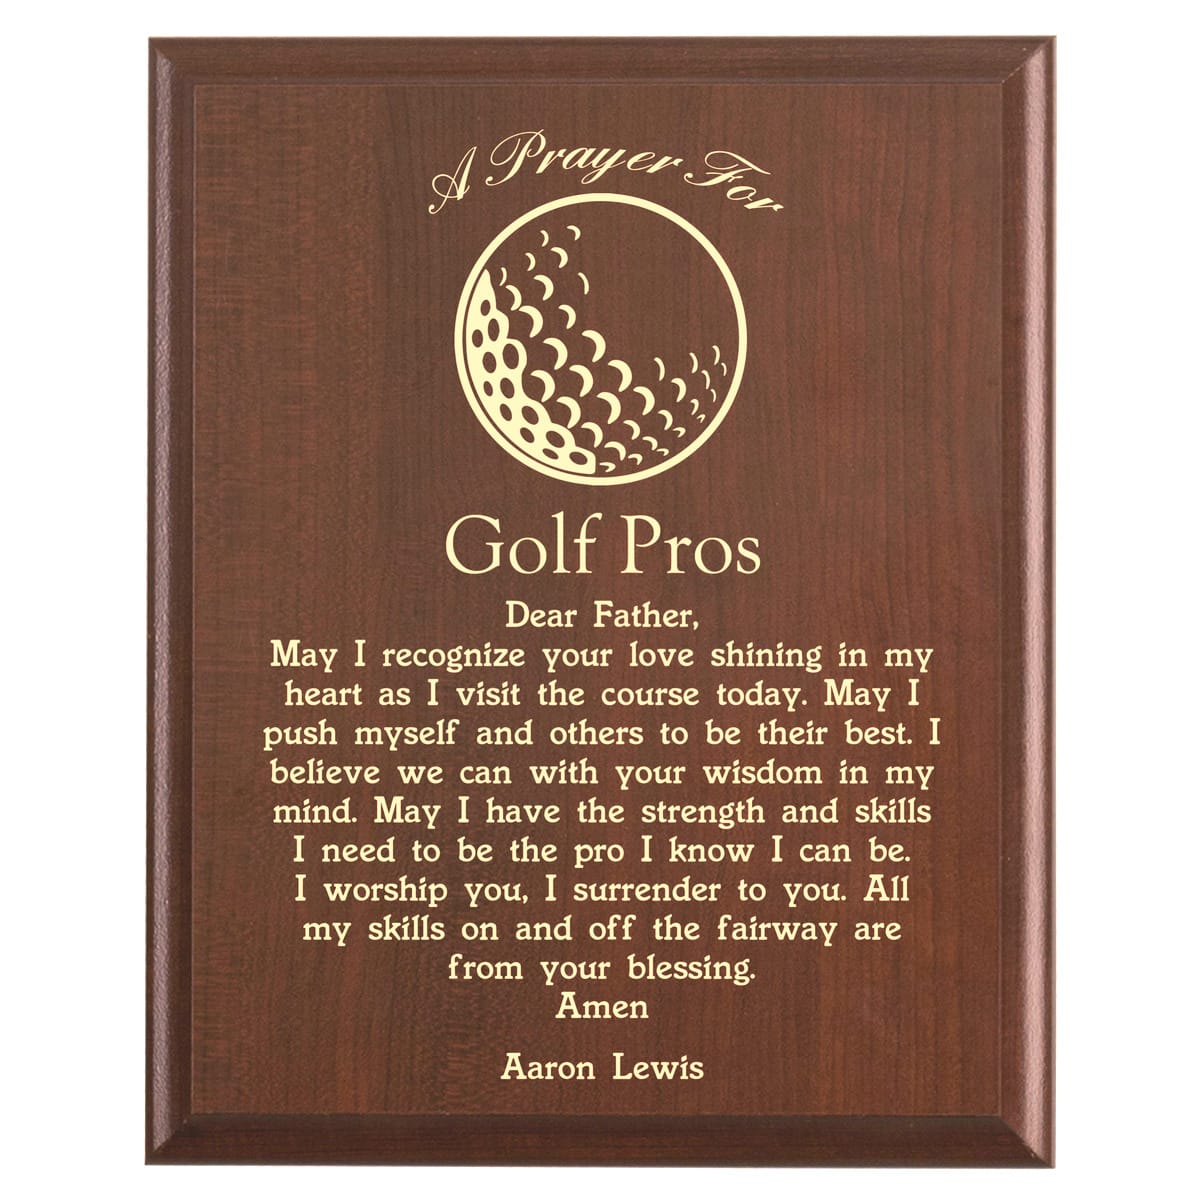 Plaque photo: Golf Pro Prayer Plaque design with free personalization. Wood style finish with customized text.